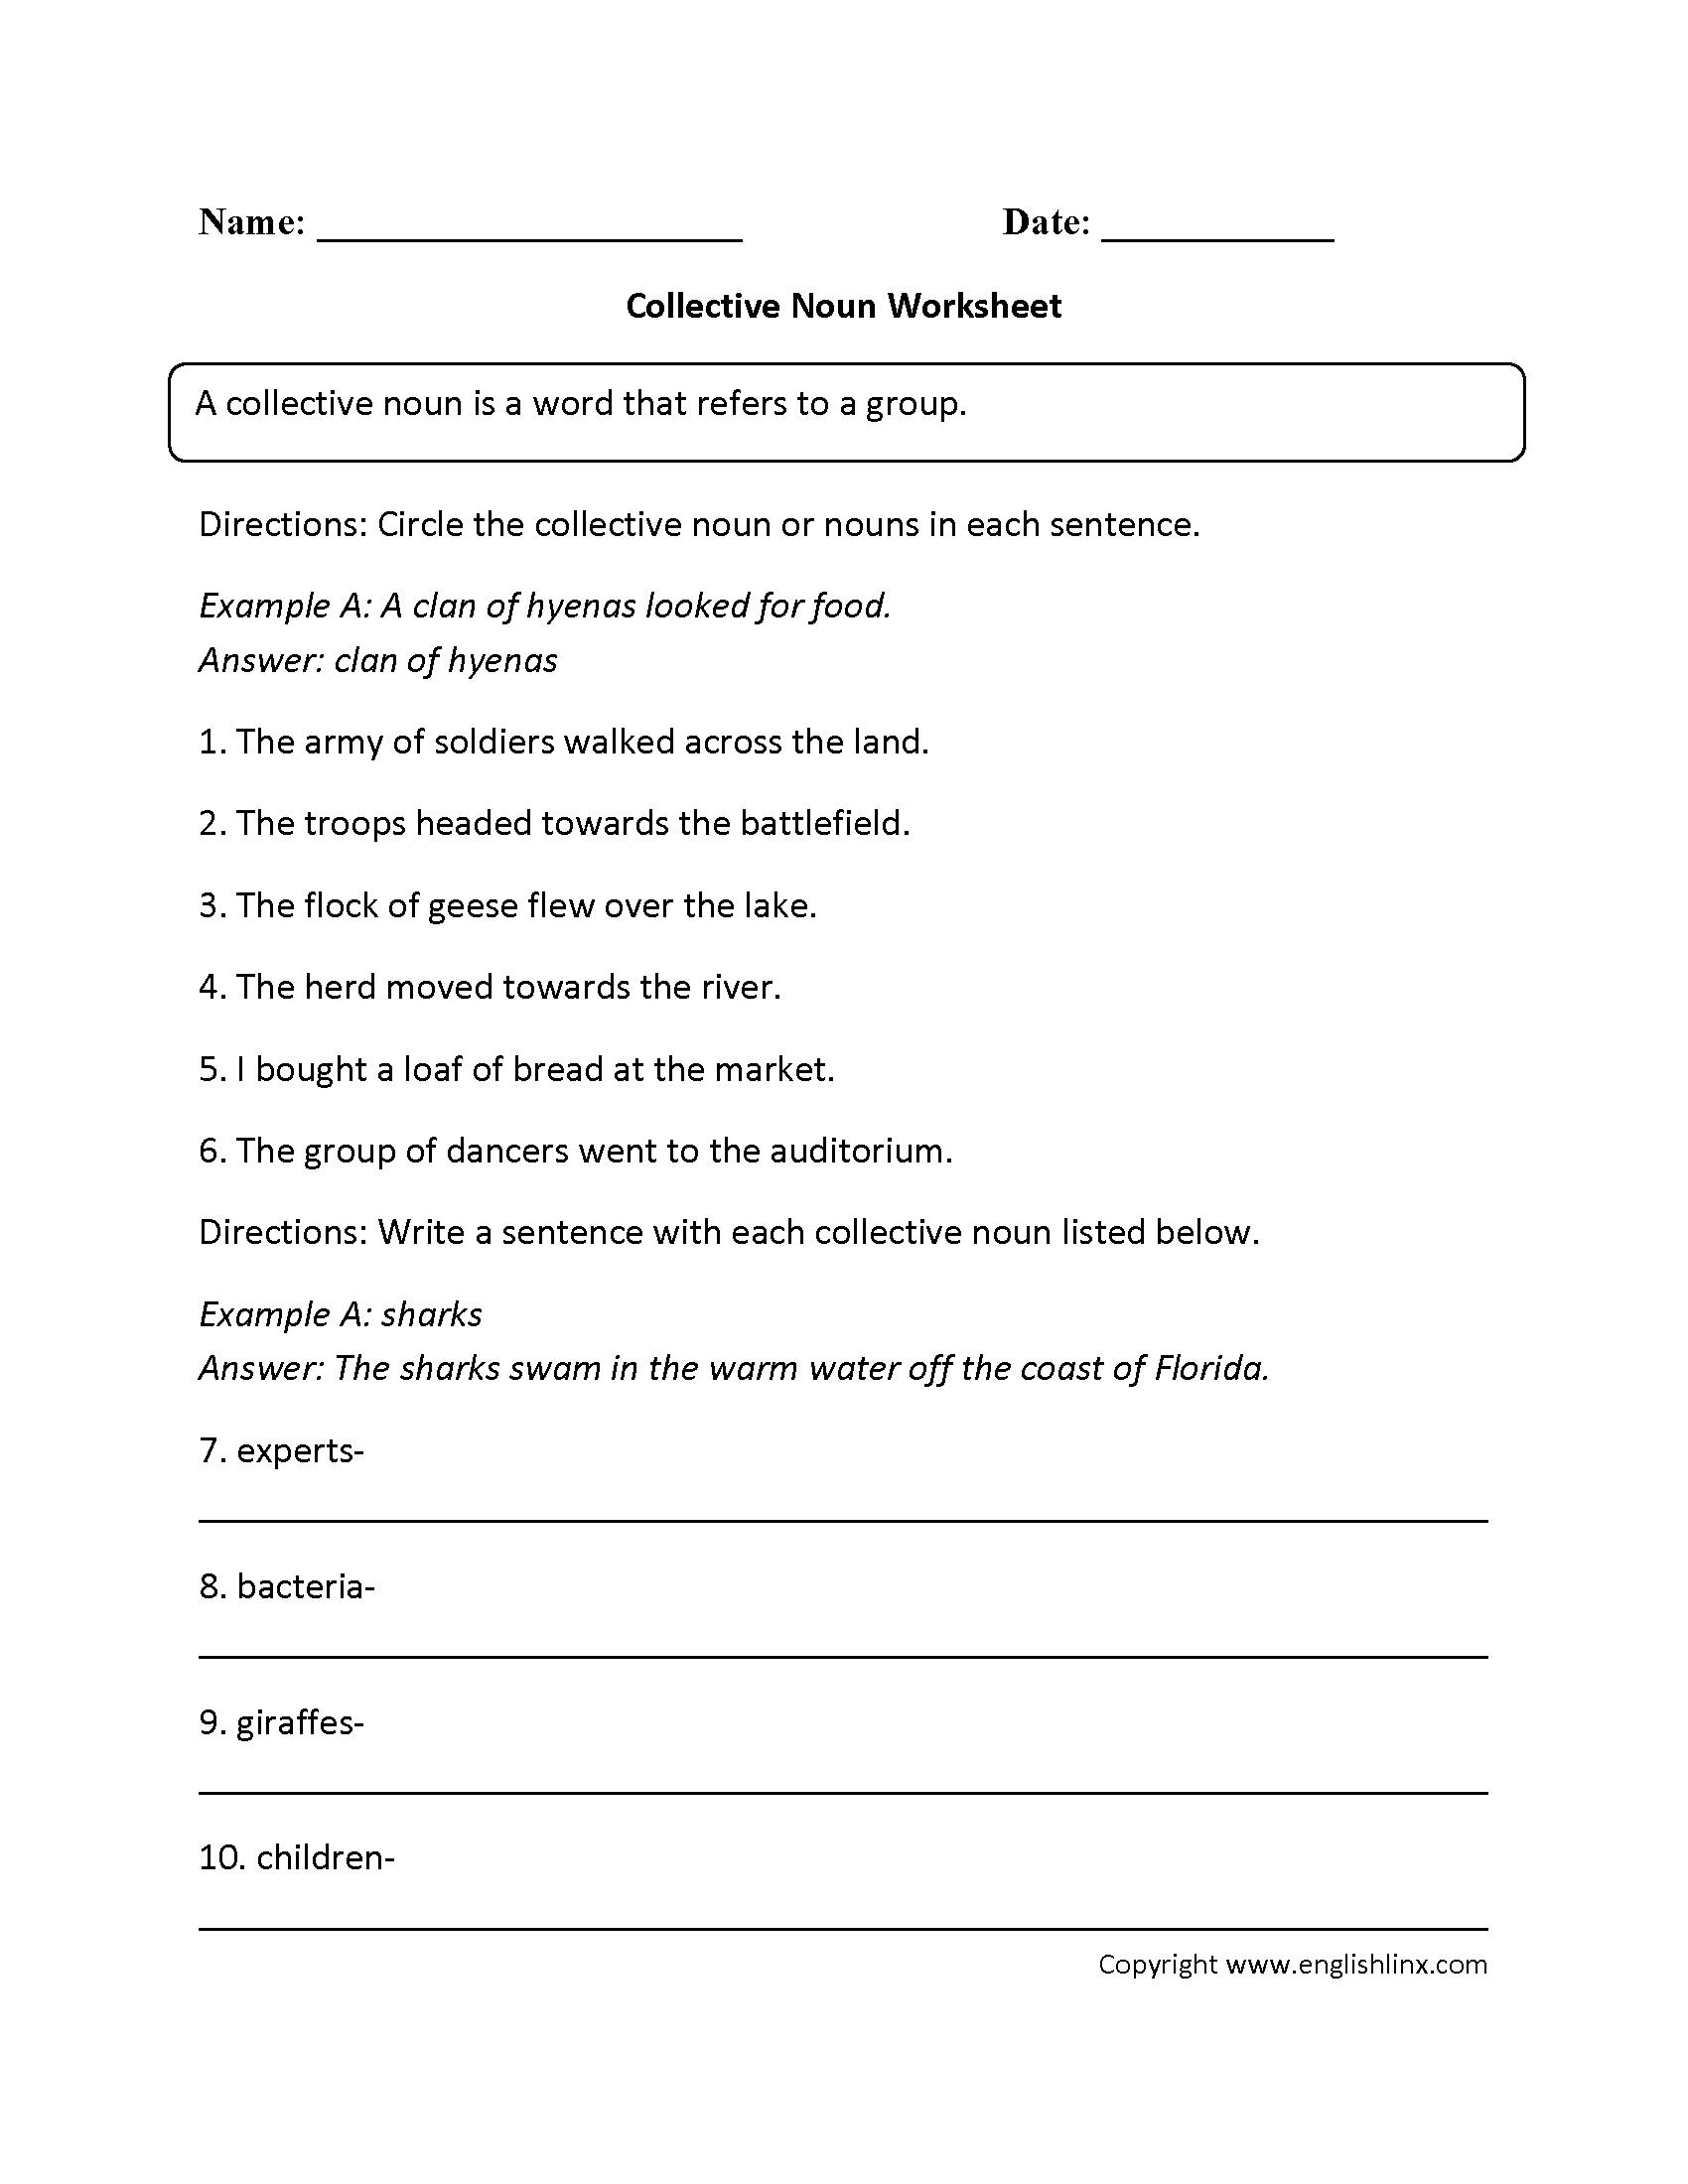 collective-nouns-worksheets-free-printables